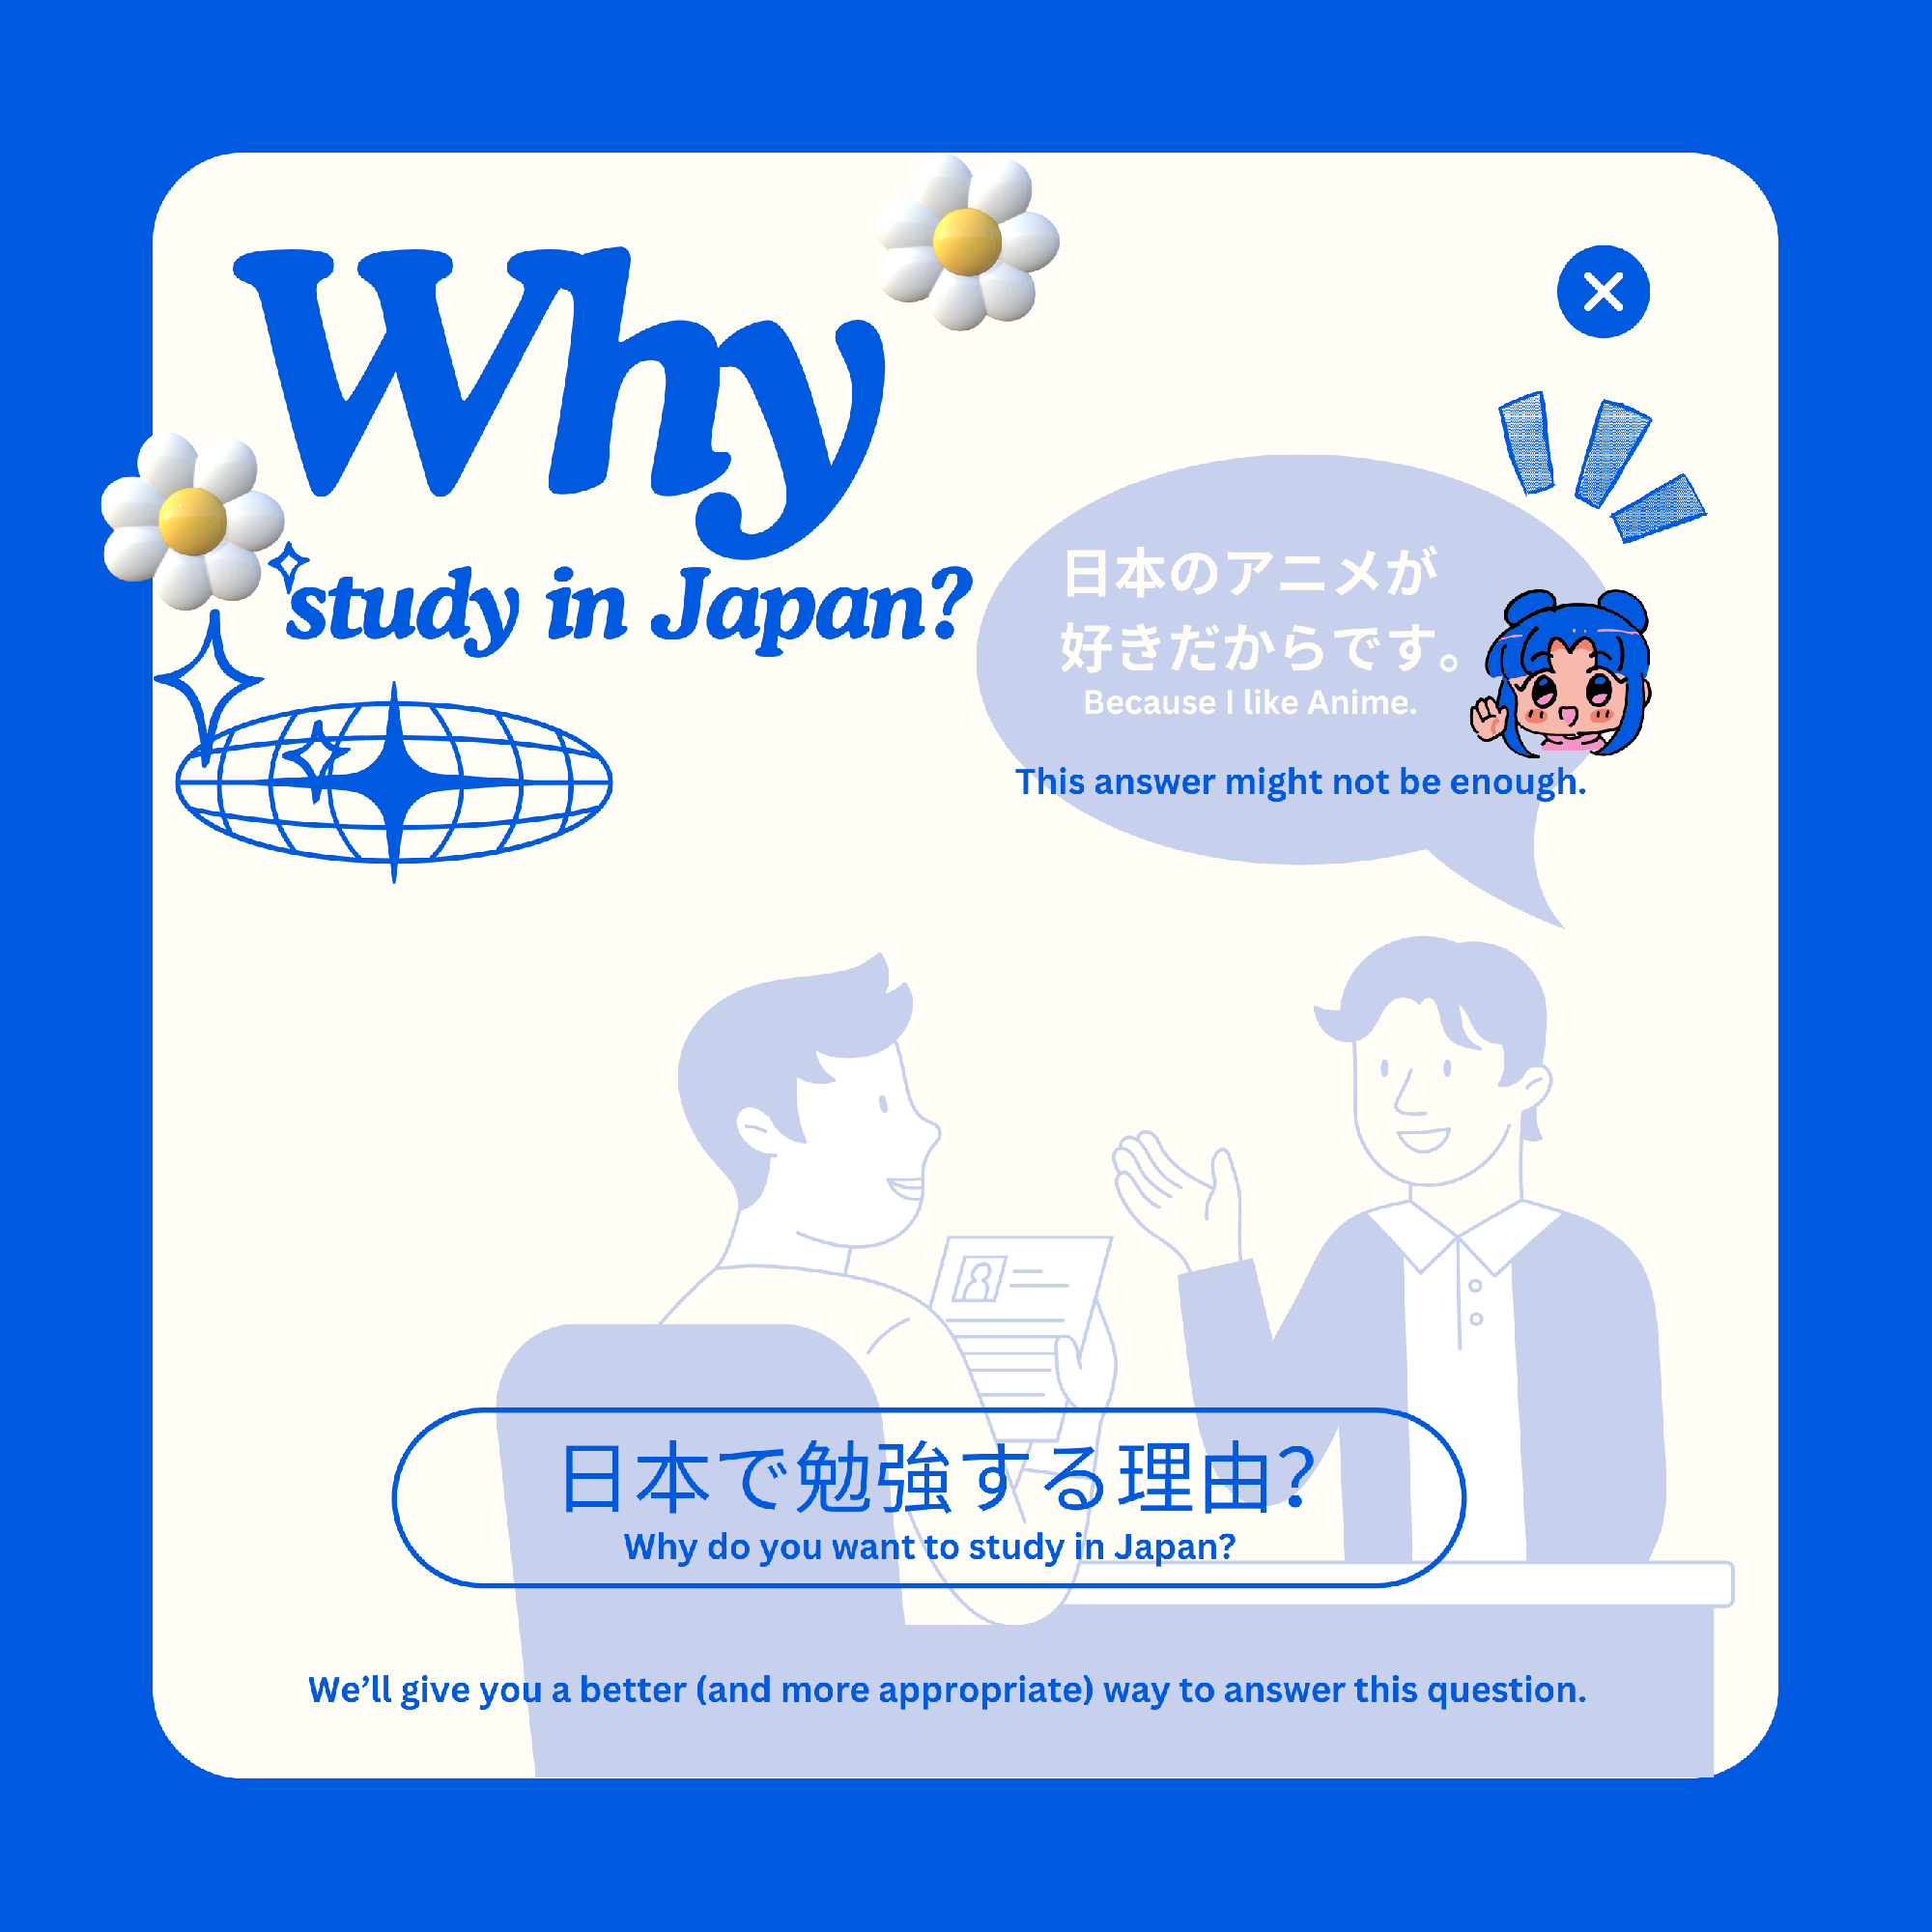 How to answer: Why do you want to study in Japan?